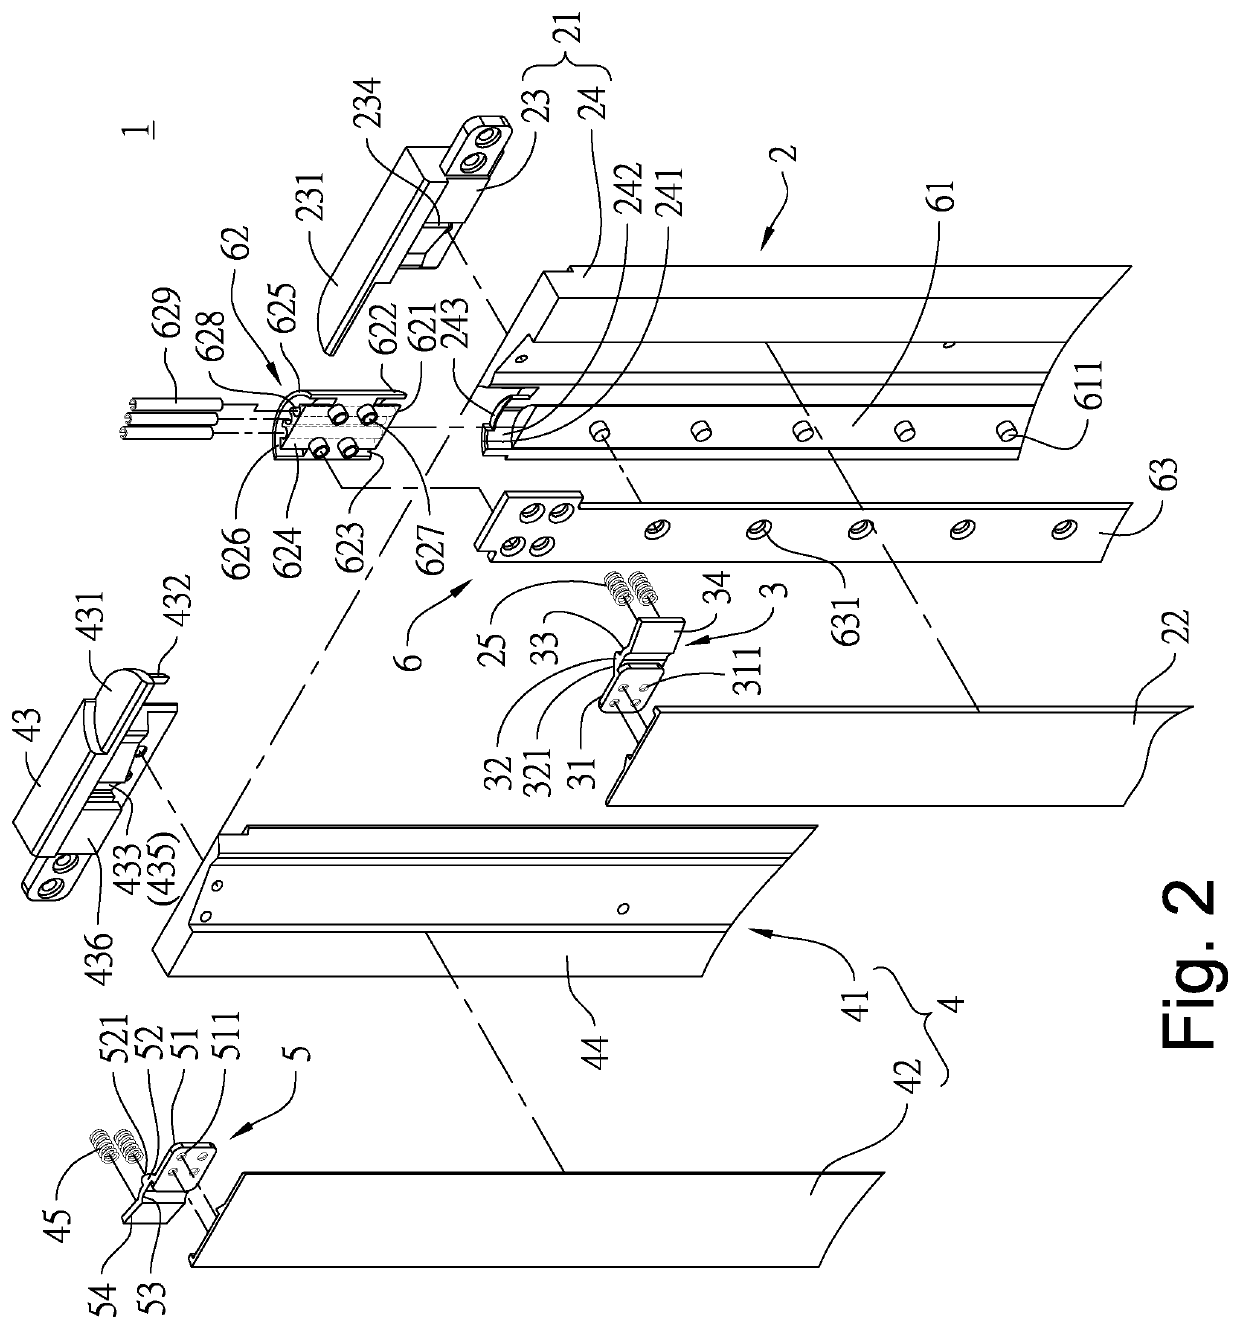 Hinge module for a foldable type device